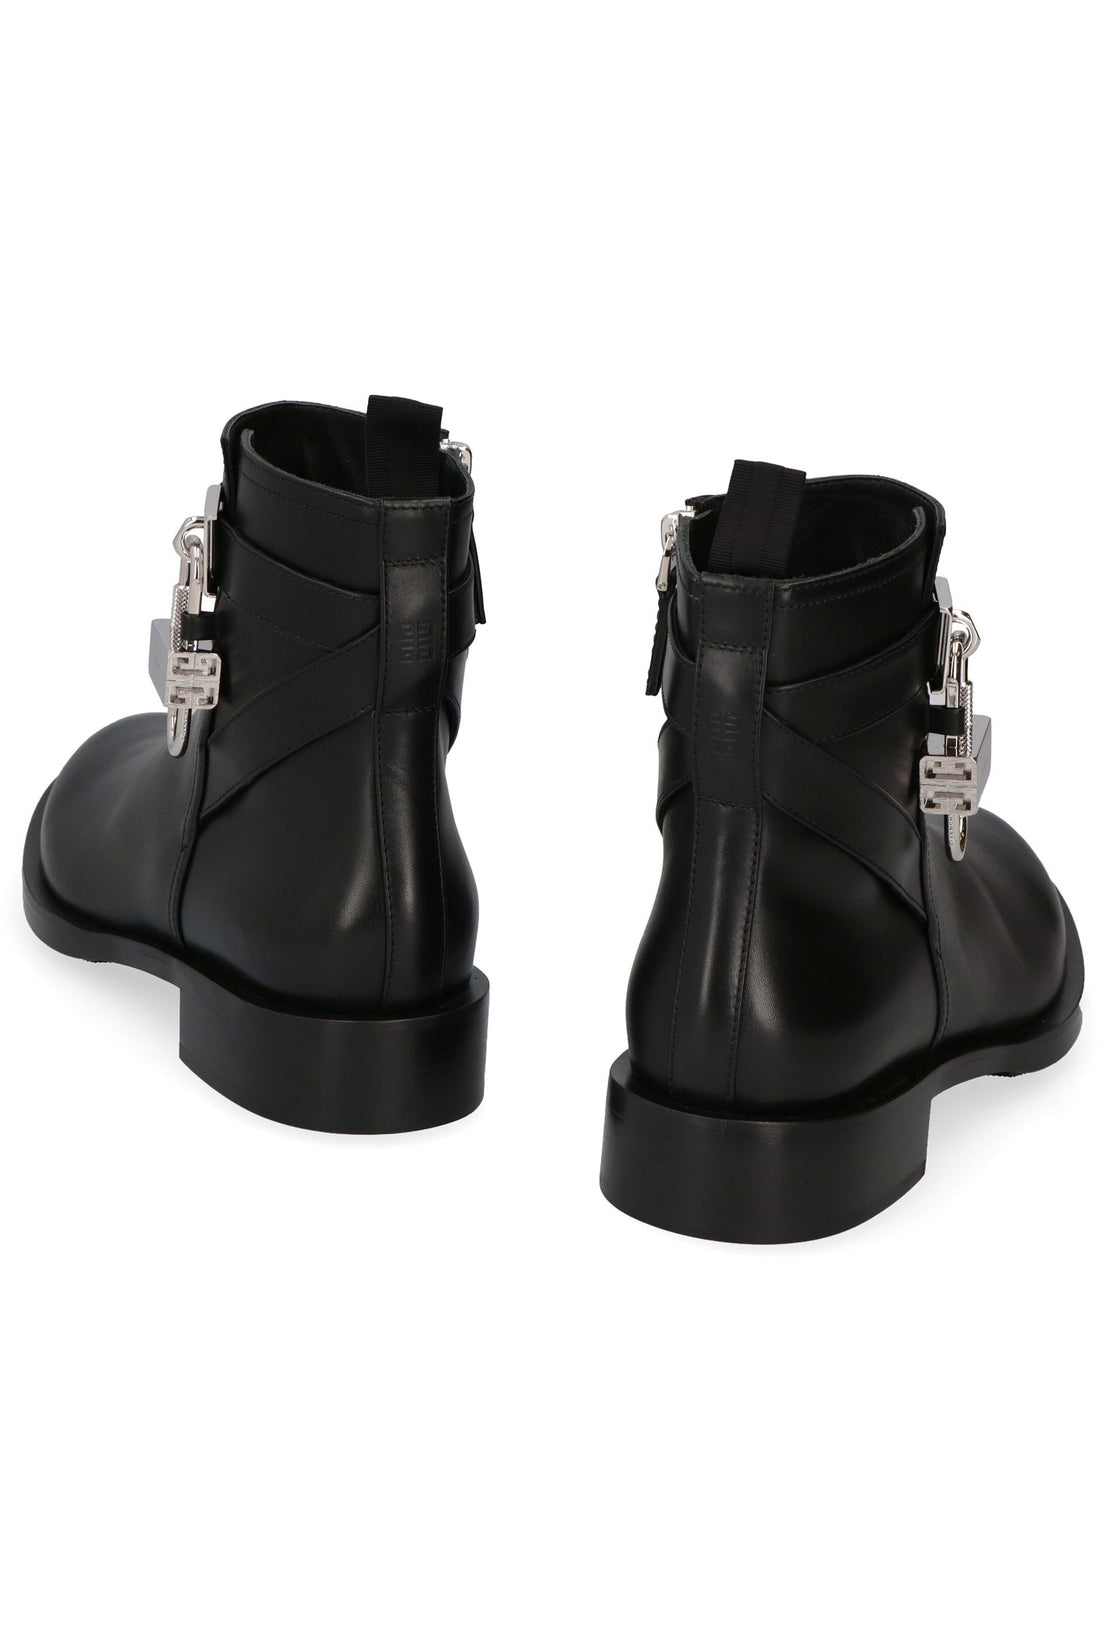 Givenchy-OUTLET-SALE-Lock leather ankle boots-ARCHIVIST